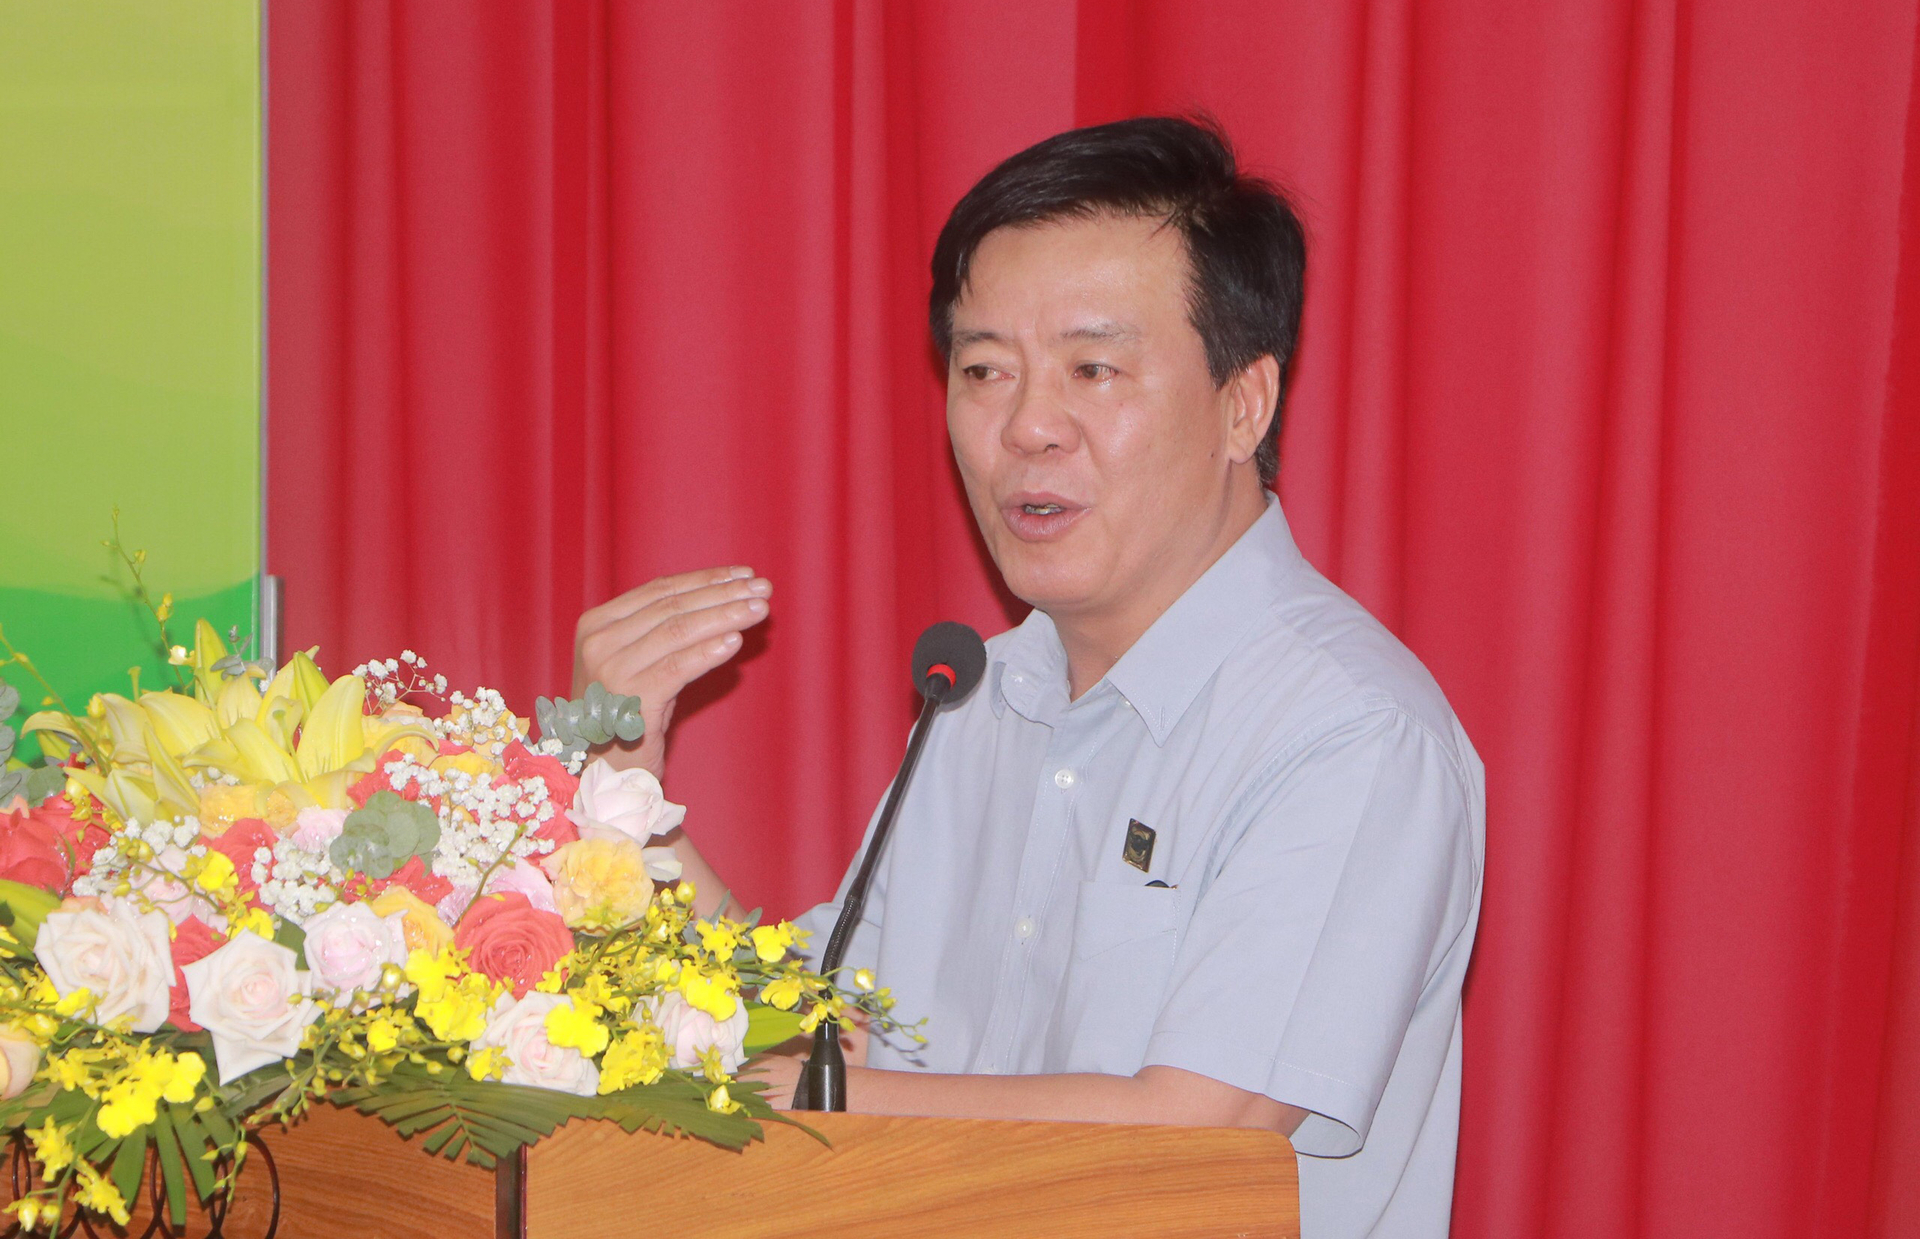 Mr. Ngo Van Dong, General Director of Binh Dien Fertilizer Joint Stock Company, said that the ultimate goal of the program is to improve people's lives. Photo: Quang Yen.